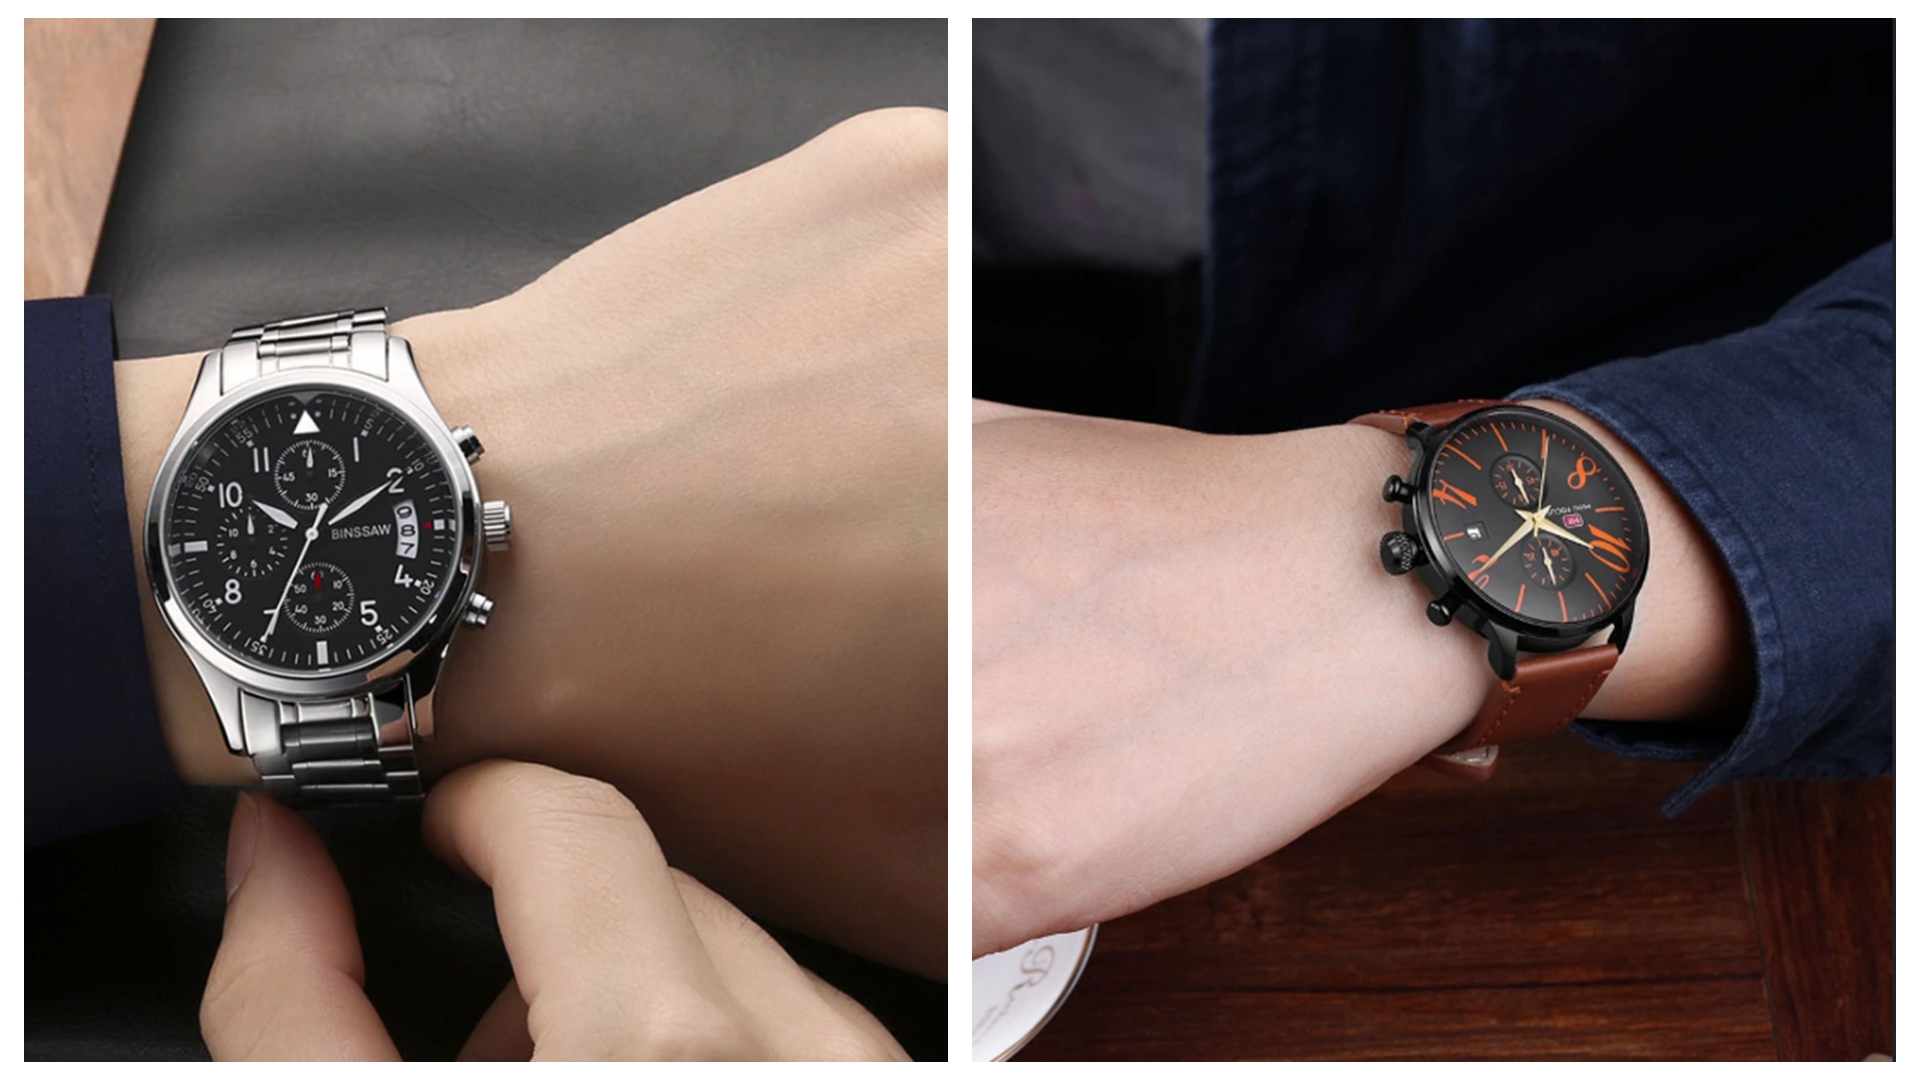 “Leather vs Metal Watch Strap: Which Is Right For You?”